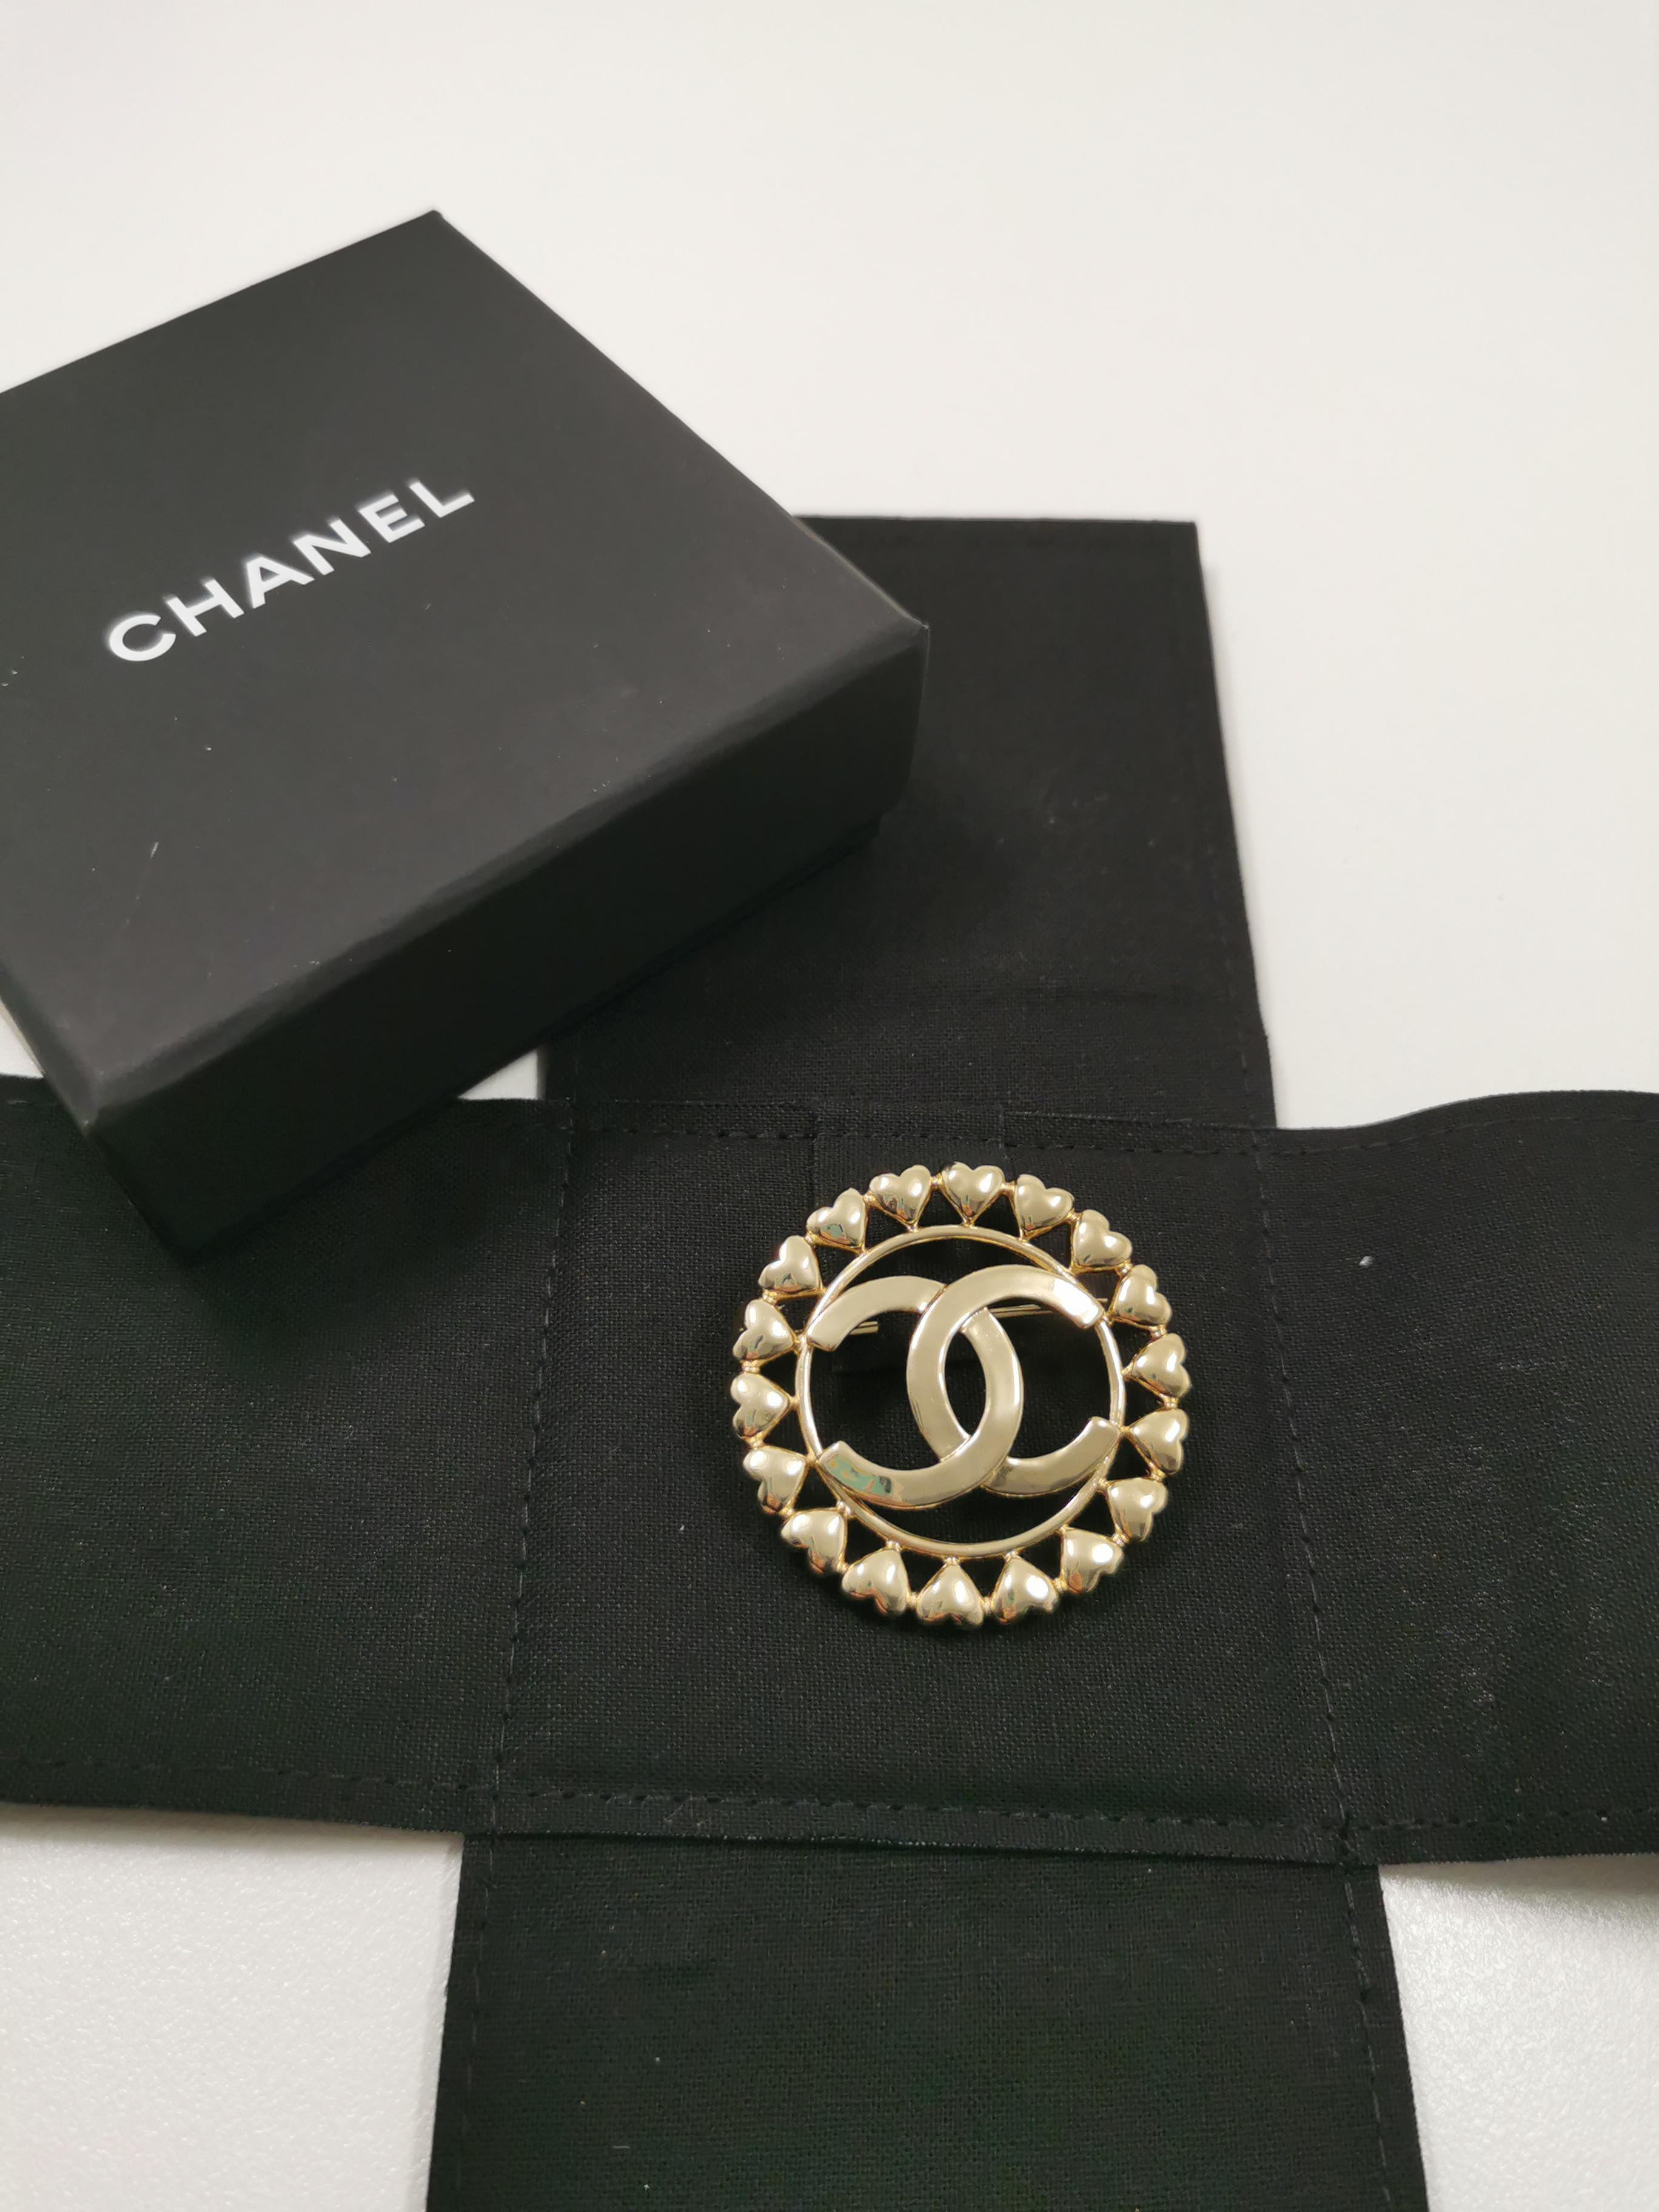 Introducing the epitome of grace and sophistication – the Chanel CC Large Round Brooch with Mini Heart Border from the Spring-Summer 2023 collection. This exquisite brooch encapsulates the essence of Chanel's iconic design language while adding a